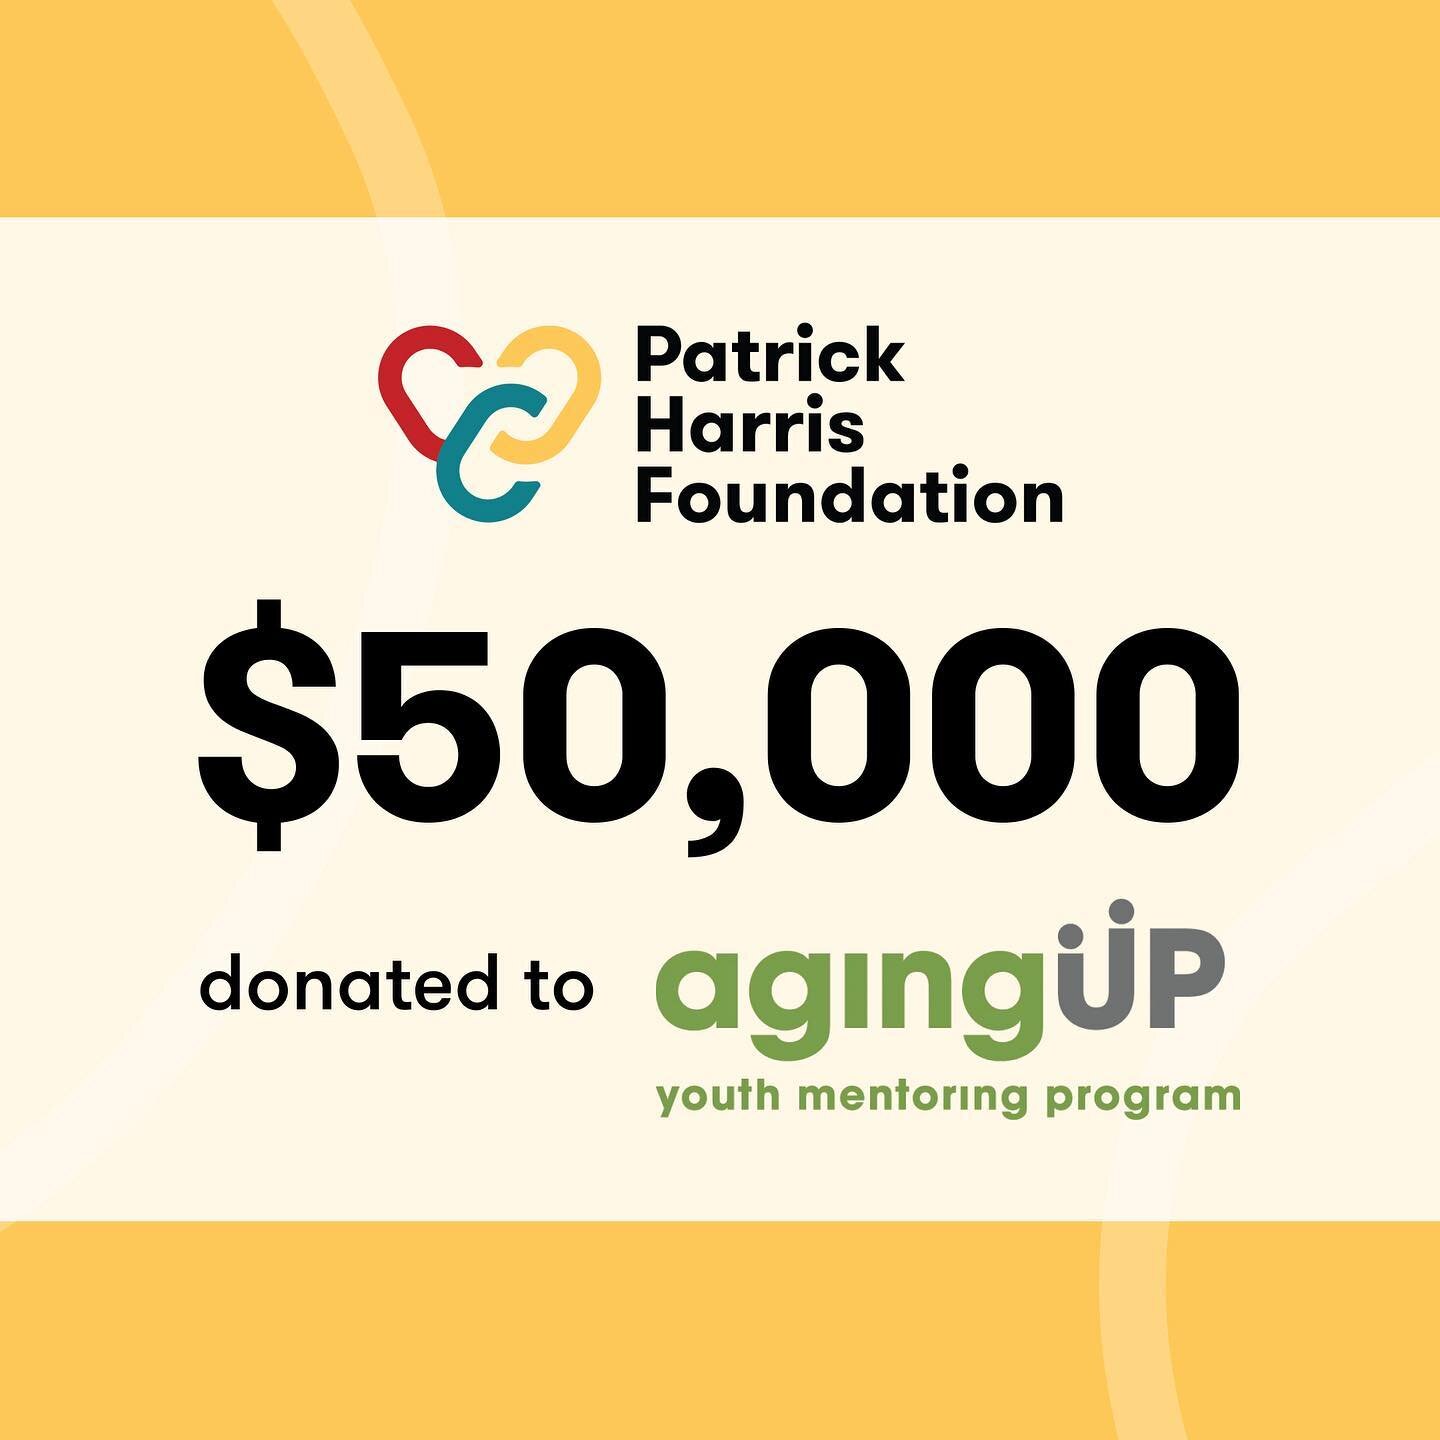 THANK YOU! We&rsquo;re still in awe at the huge level of support from last week&rsquo;s tournament. Thanks to you, we were able to donate $50,000 to @aging_up, directly making a positive impact on disadvantaged youth in the Sacramento area. WE DID IT